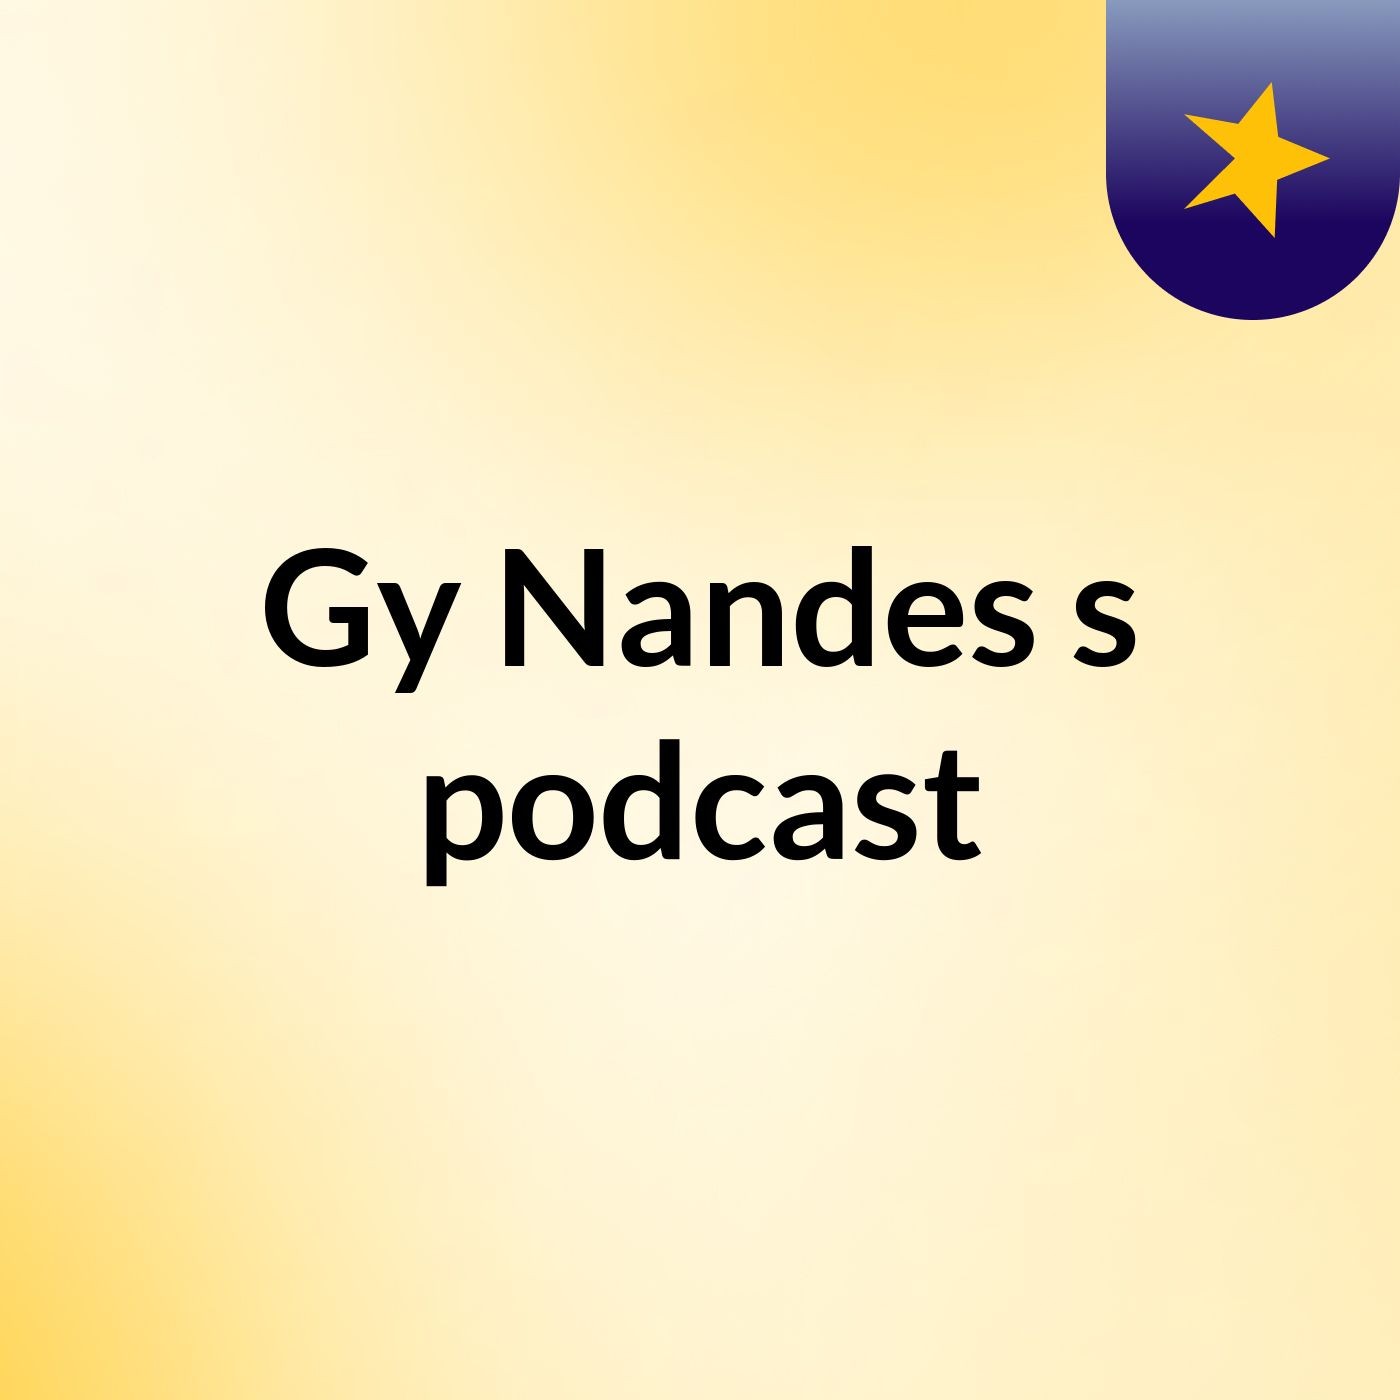 Gy Nandes's podcast